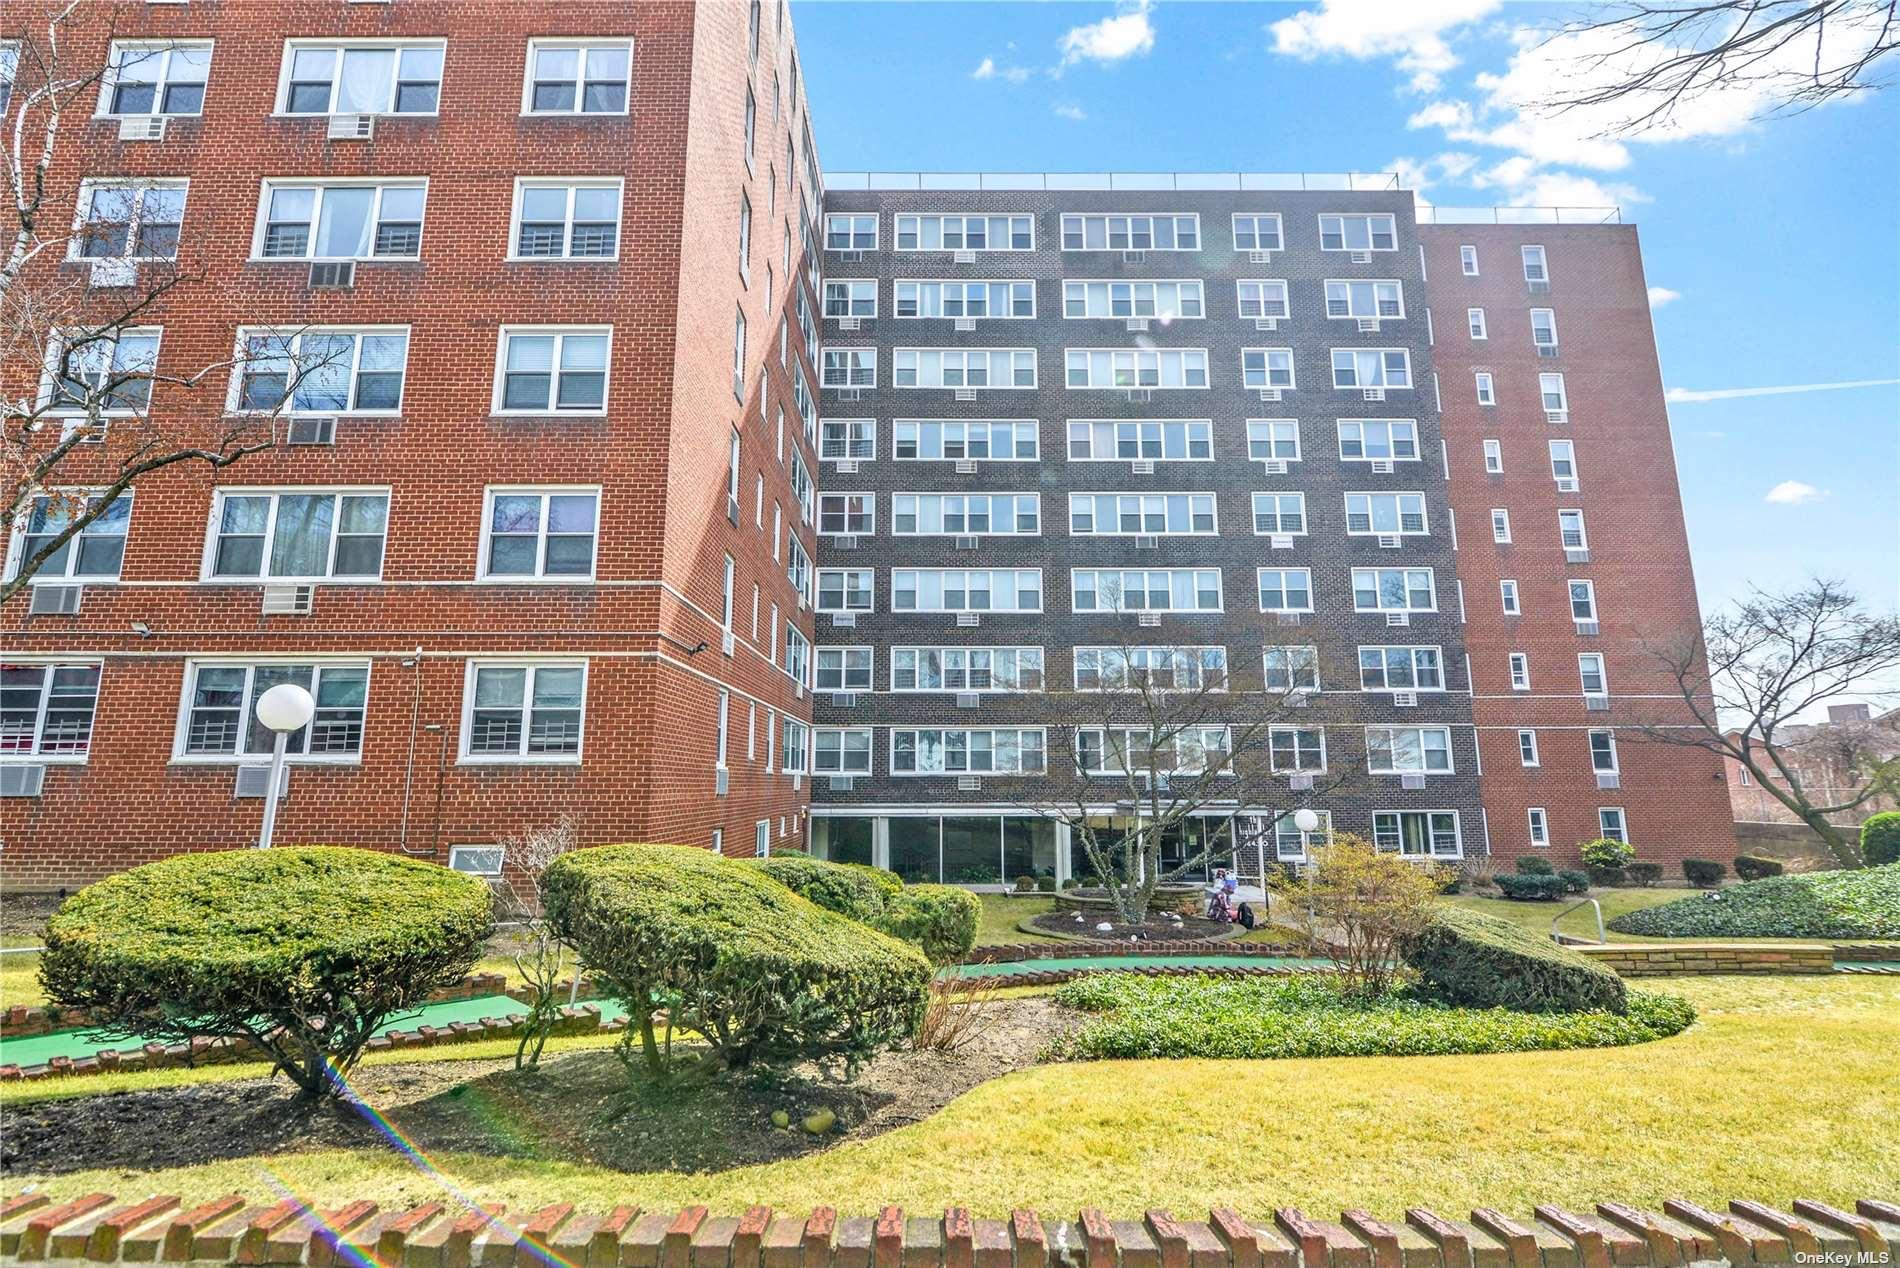 164-20 Highland Avenue #7J in Queens, Jamaica Hills, NY 11432